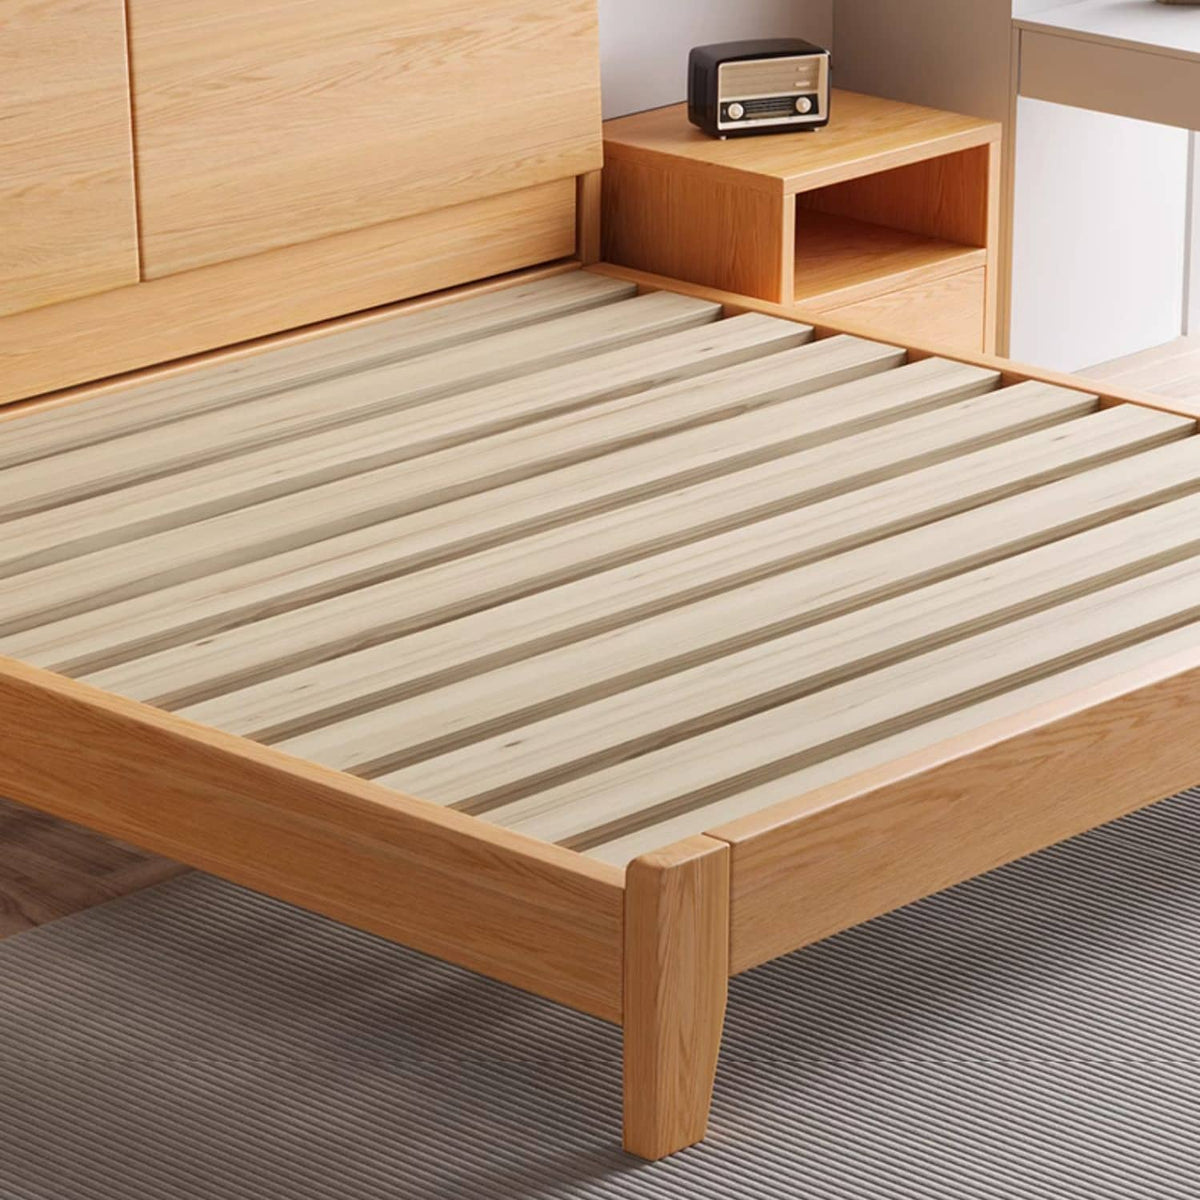 Charming Rubber Wood Pine Bed Frame in Natural Finish - Perfect for Any Bedroom Decor hmak-241